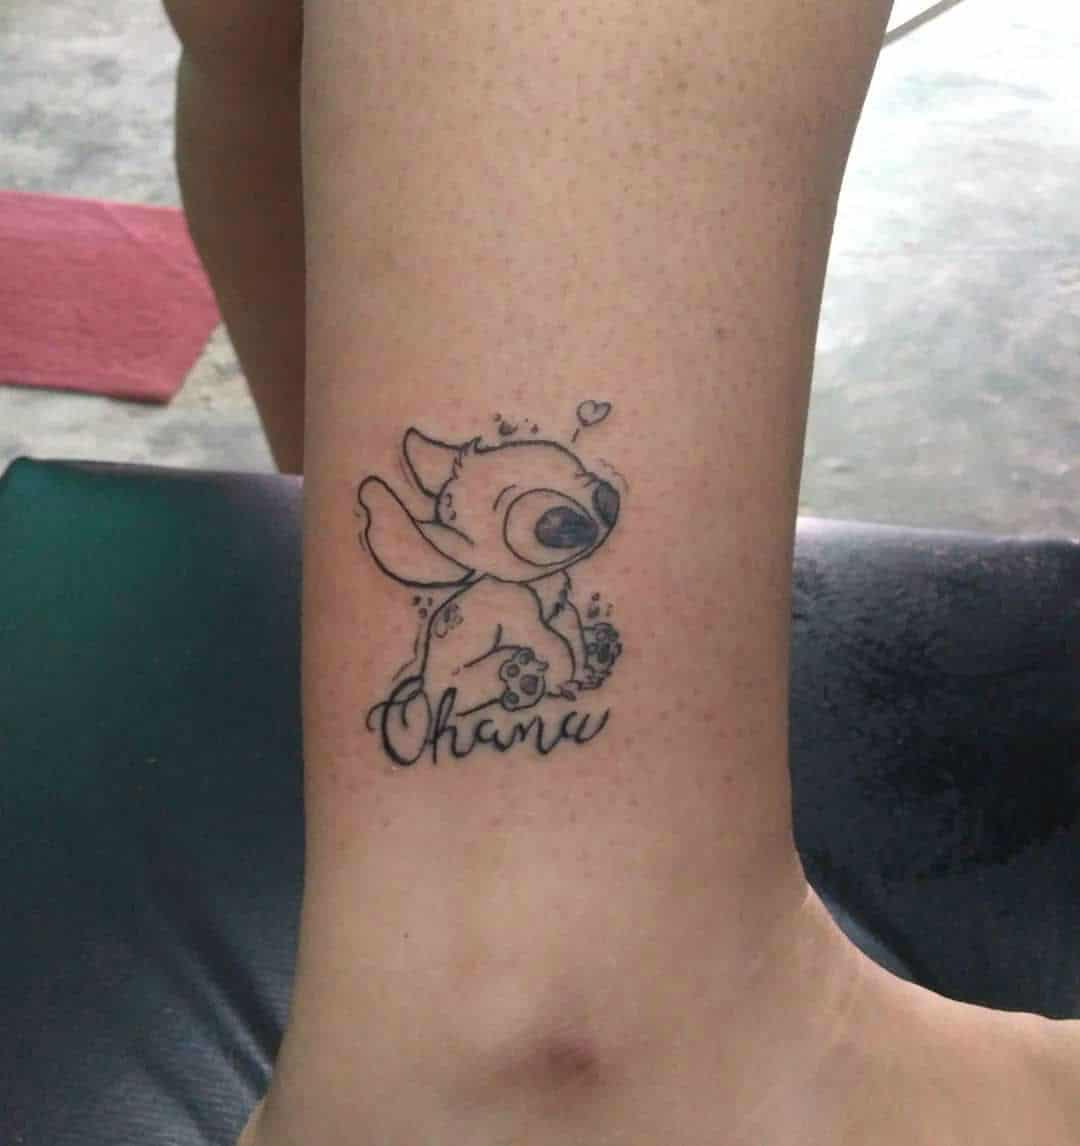 50 Ohana Tattoos Ideas and Designs for FamilyCentered Individuals  Tats  n Rings